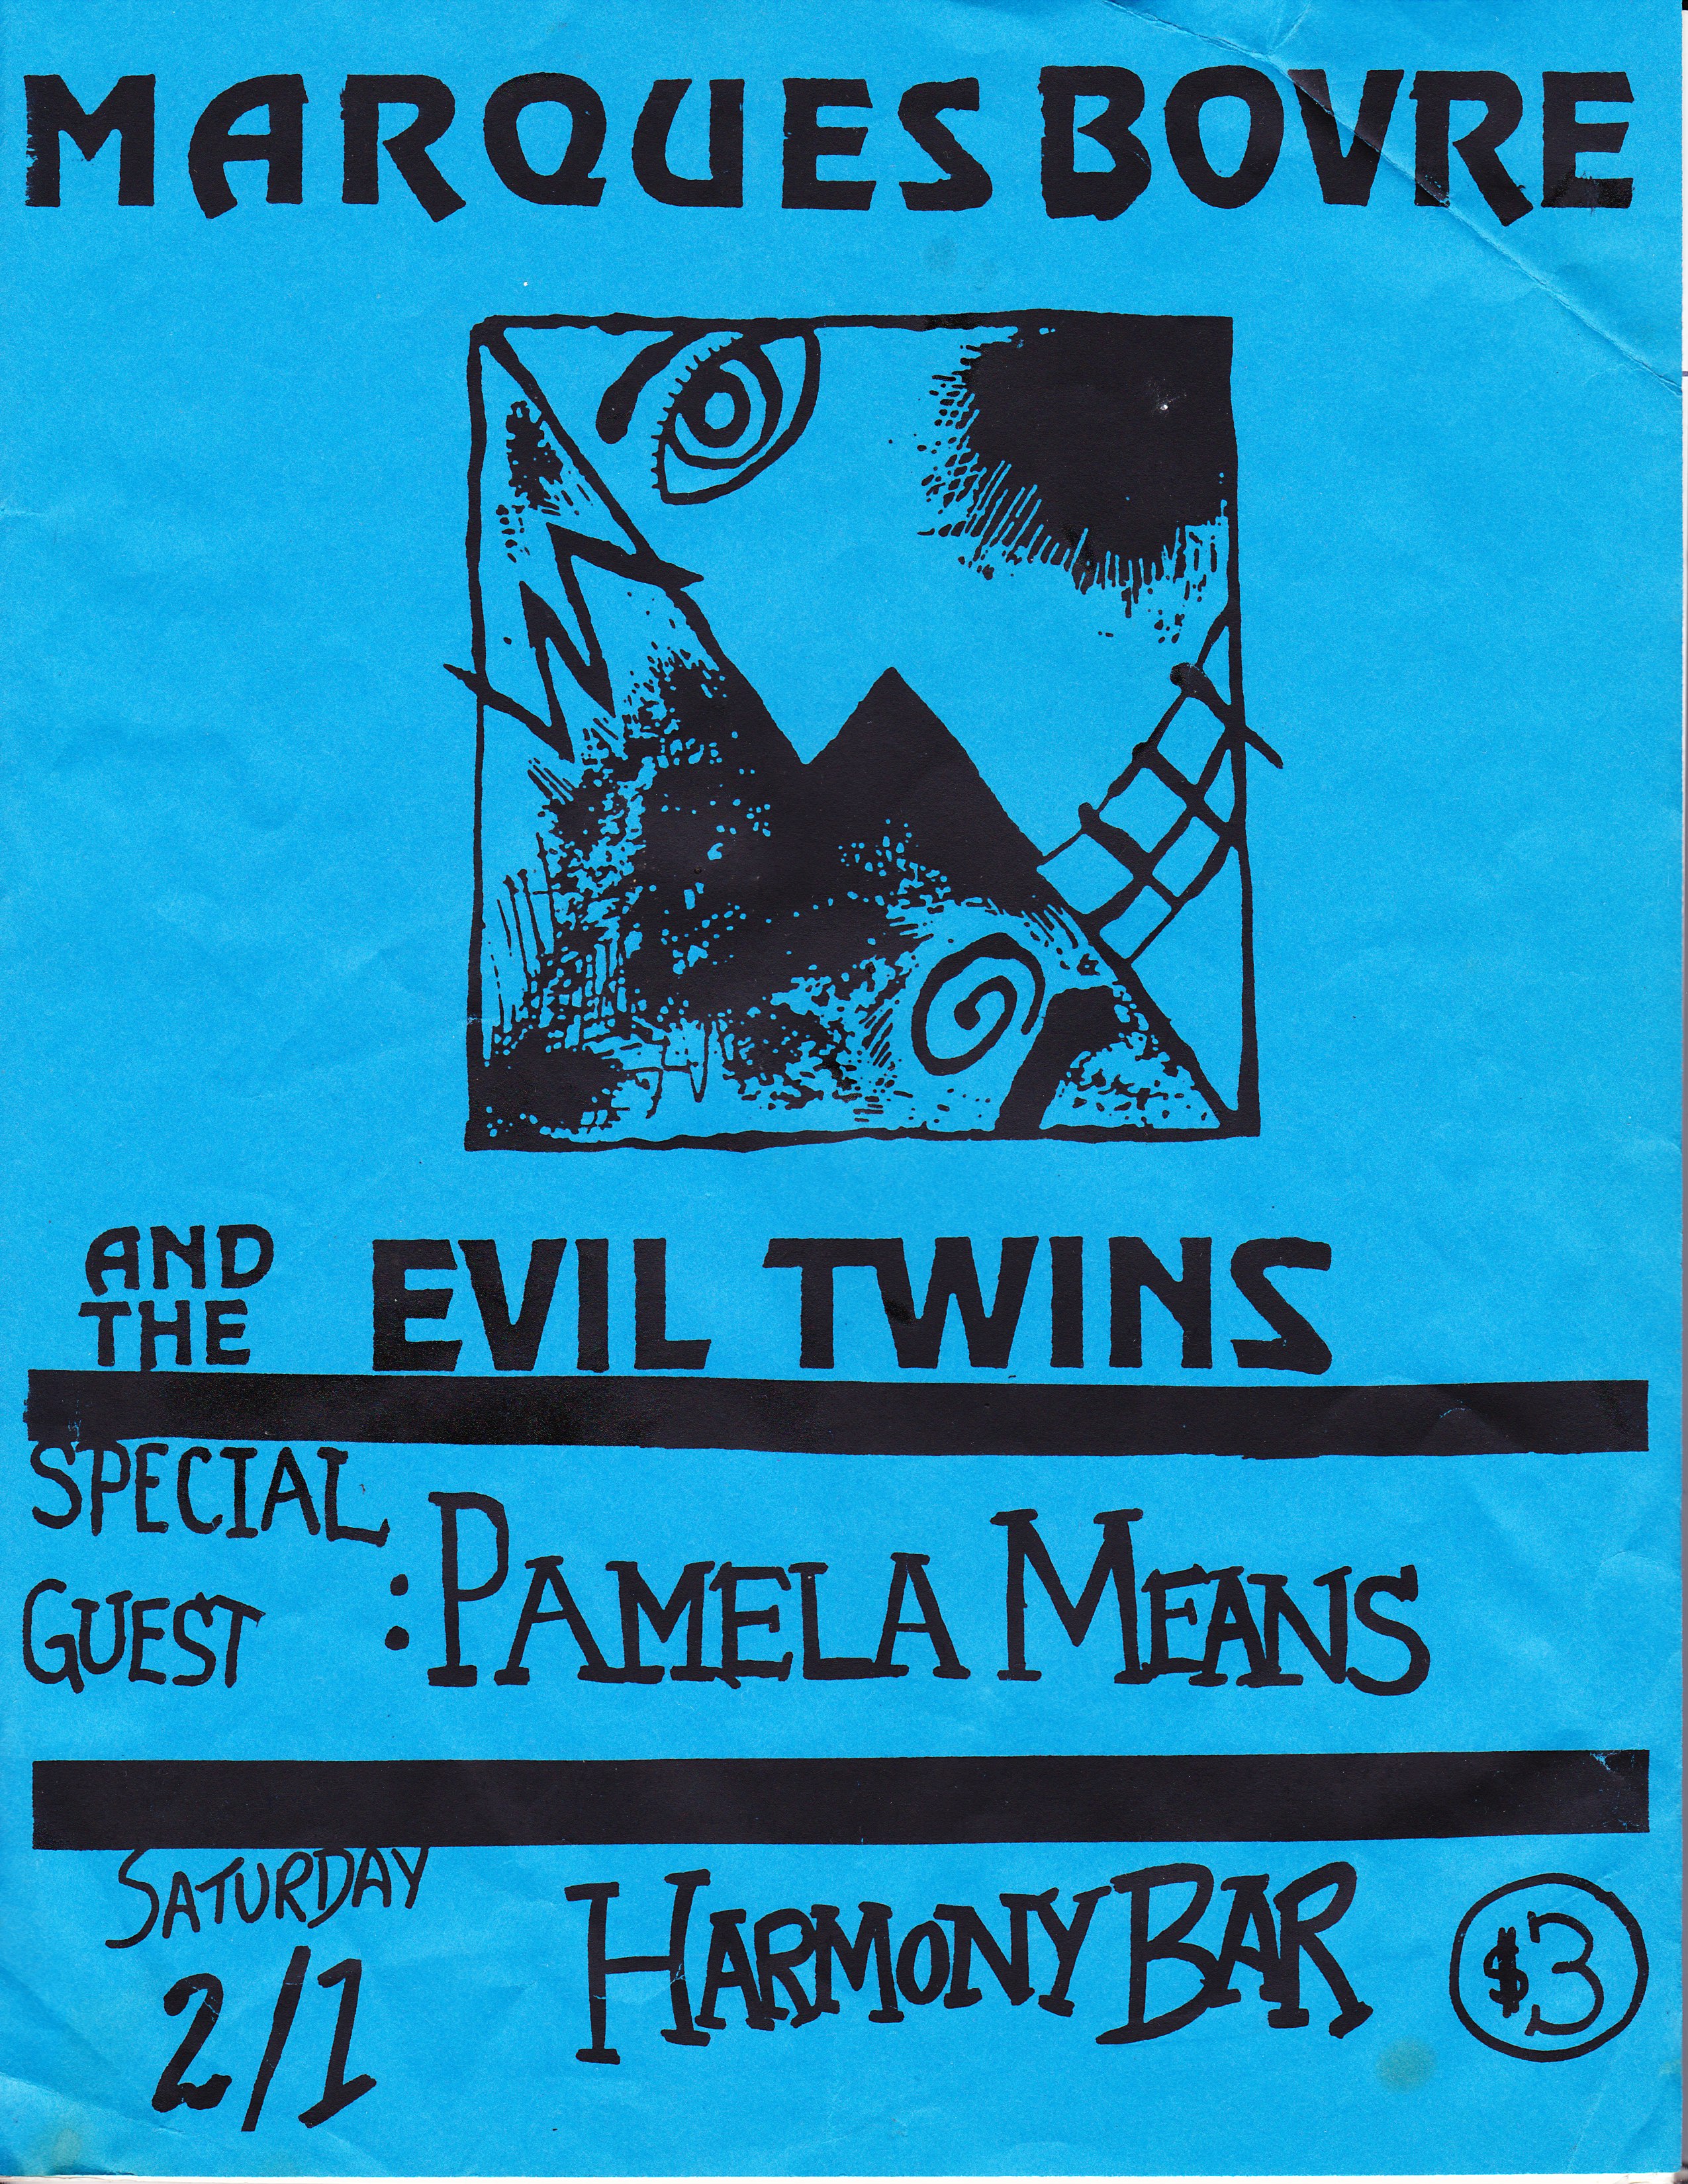 Marques Bovre and the Evil Twins, February 1, 1992